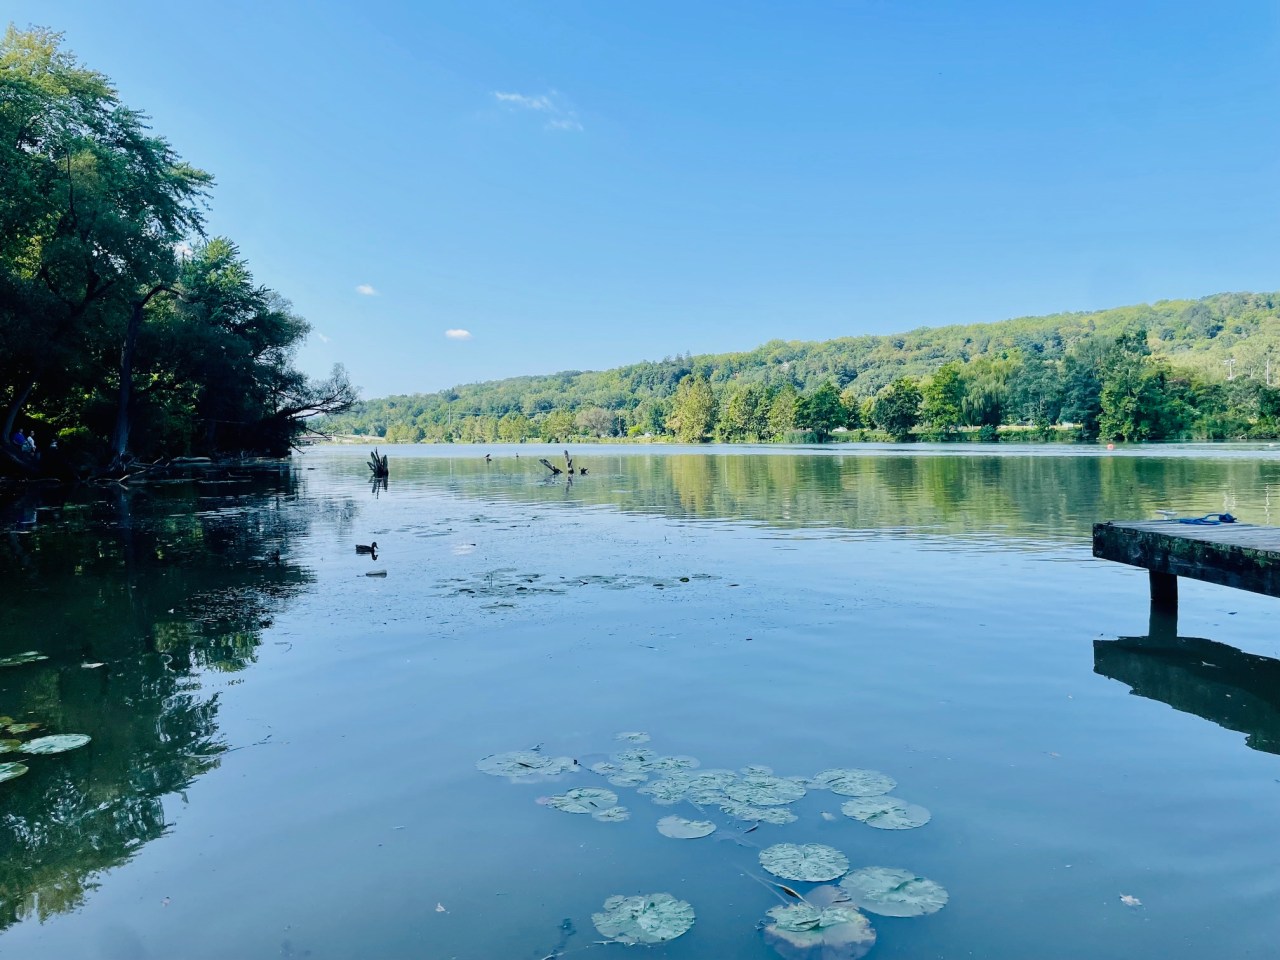 Come Along As We Enjoy An Affordable Weekend Getaway To The Finger Lakes In New York